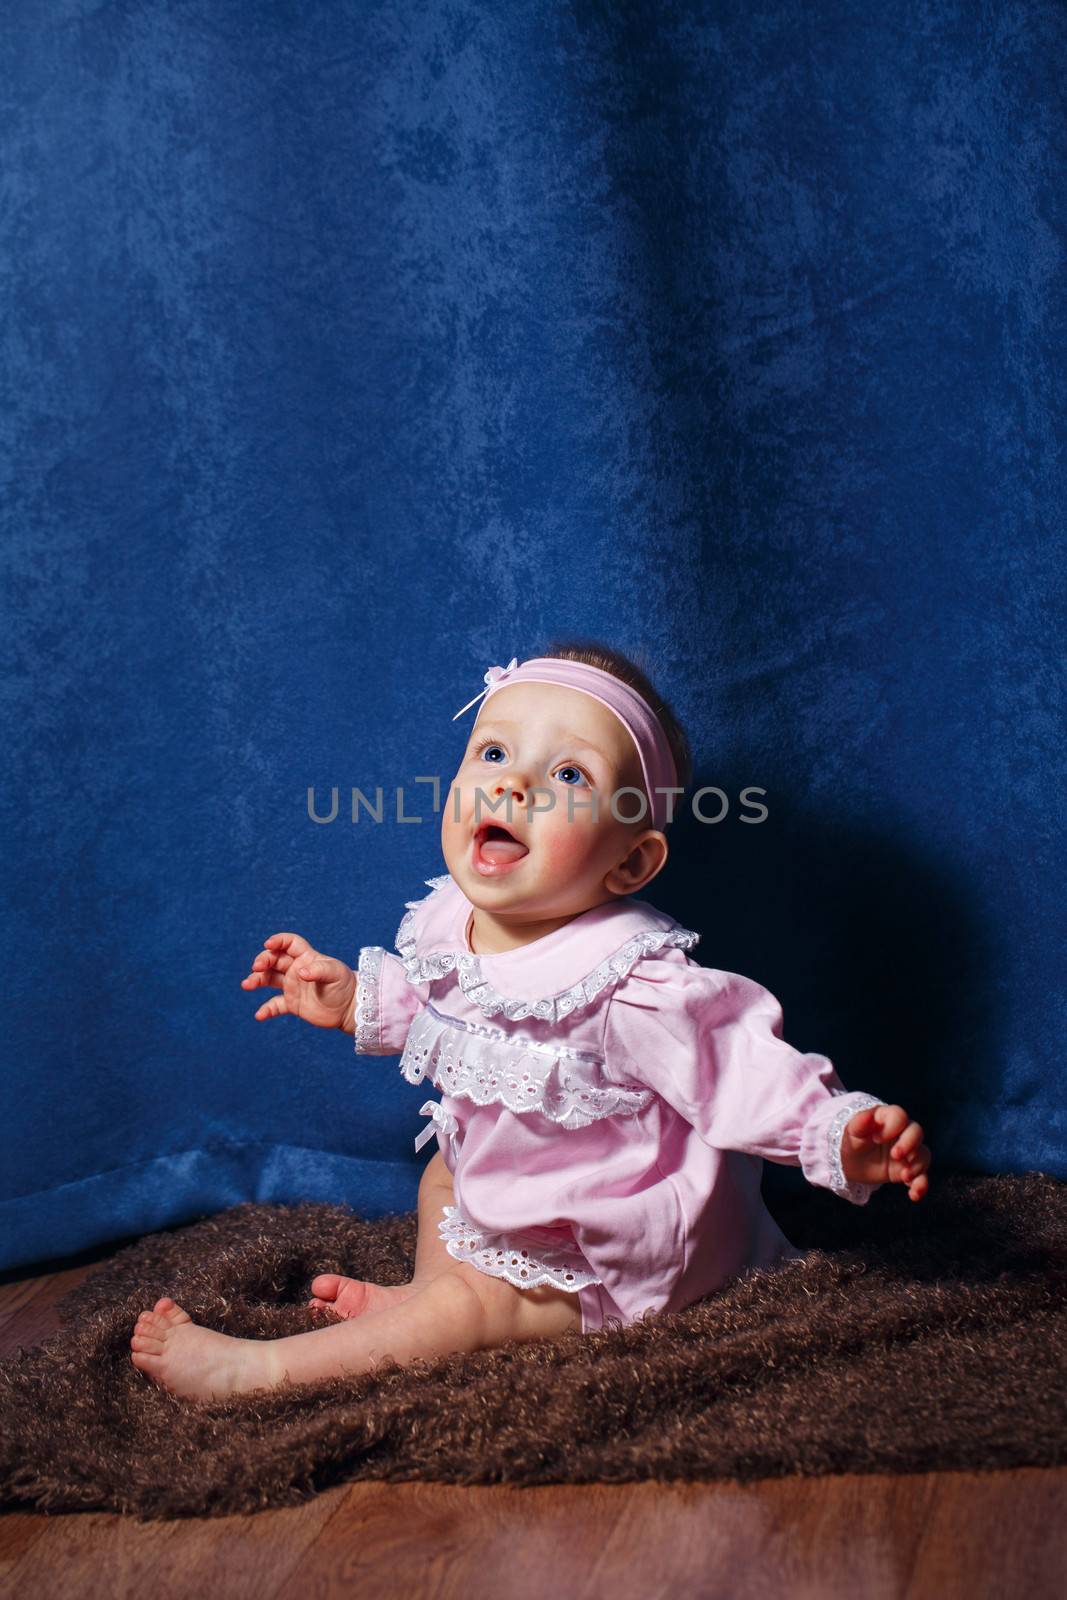 Pretty blue-eyed girl in a pink dress sitting on the floor